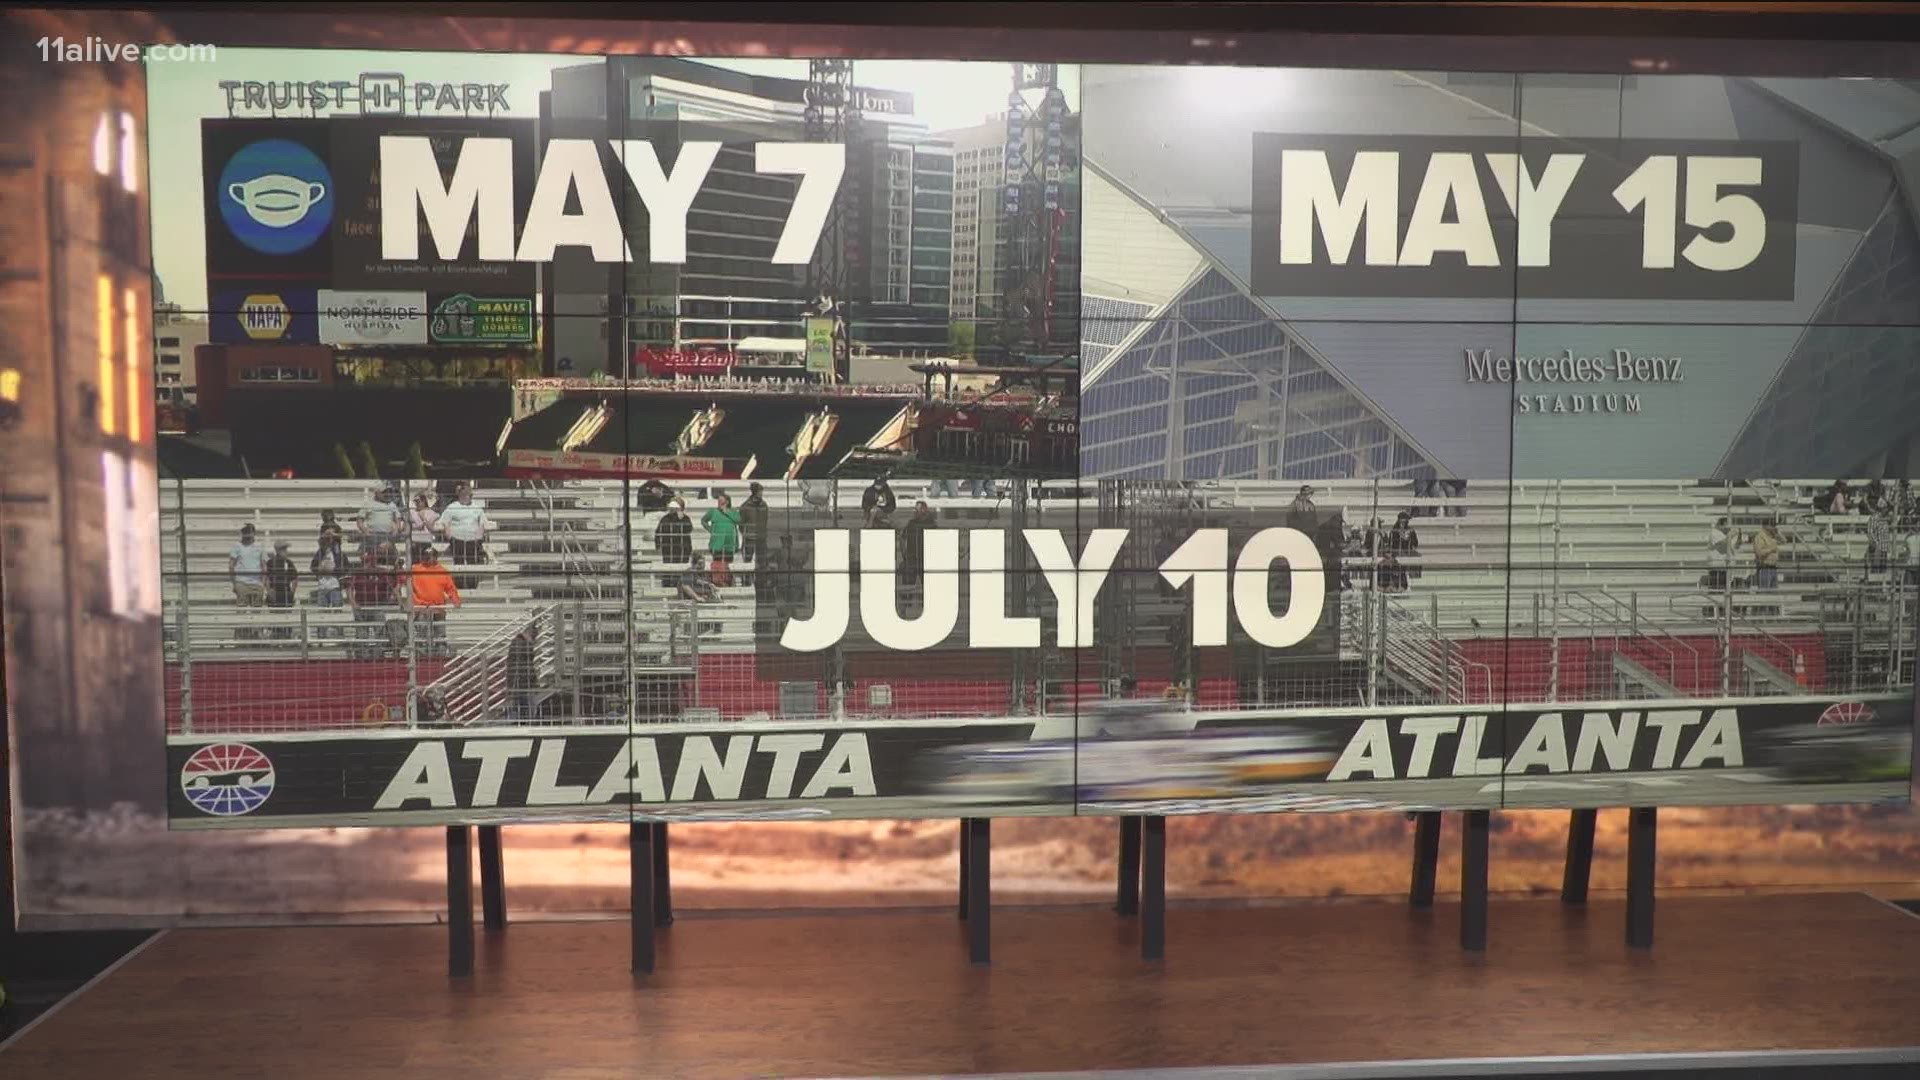 Some of Atlanta's athletes will soon be cheered on by stands packed with fans.